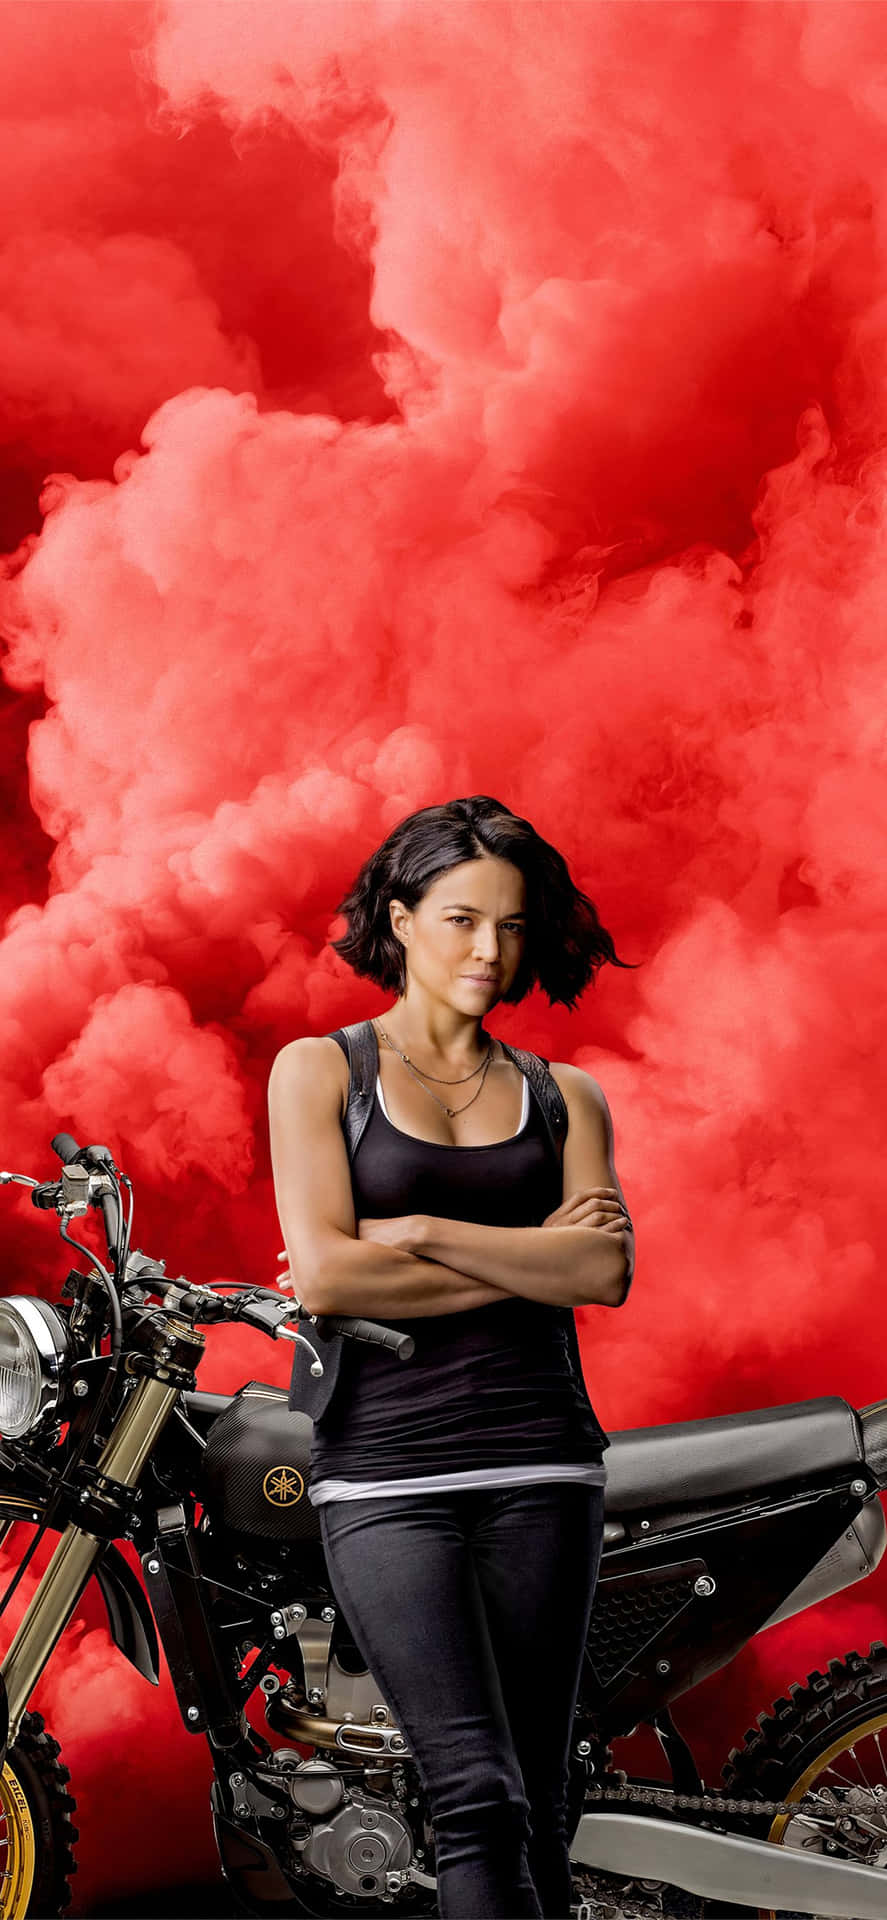 A Woman Standing Next To A Motorcycle Wallpaper